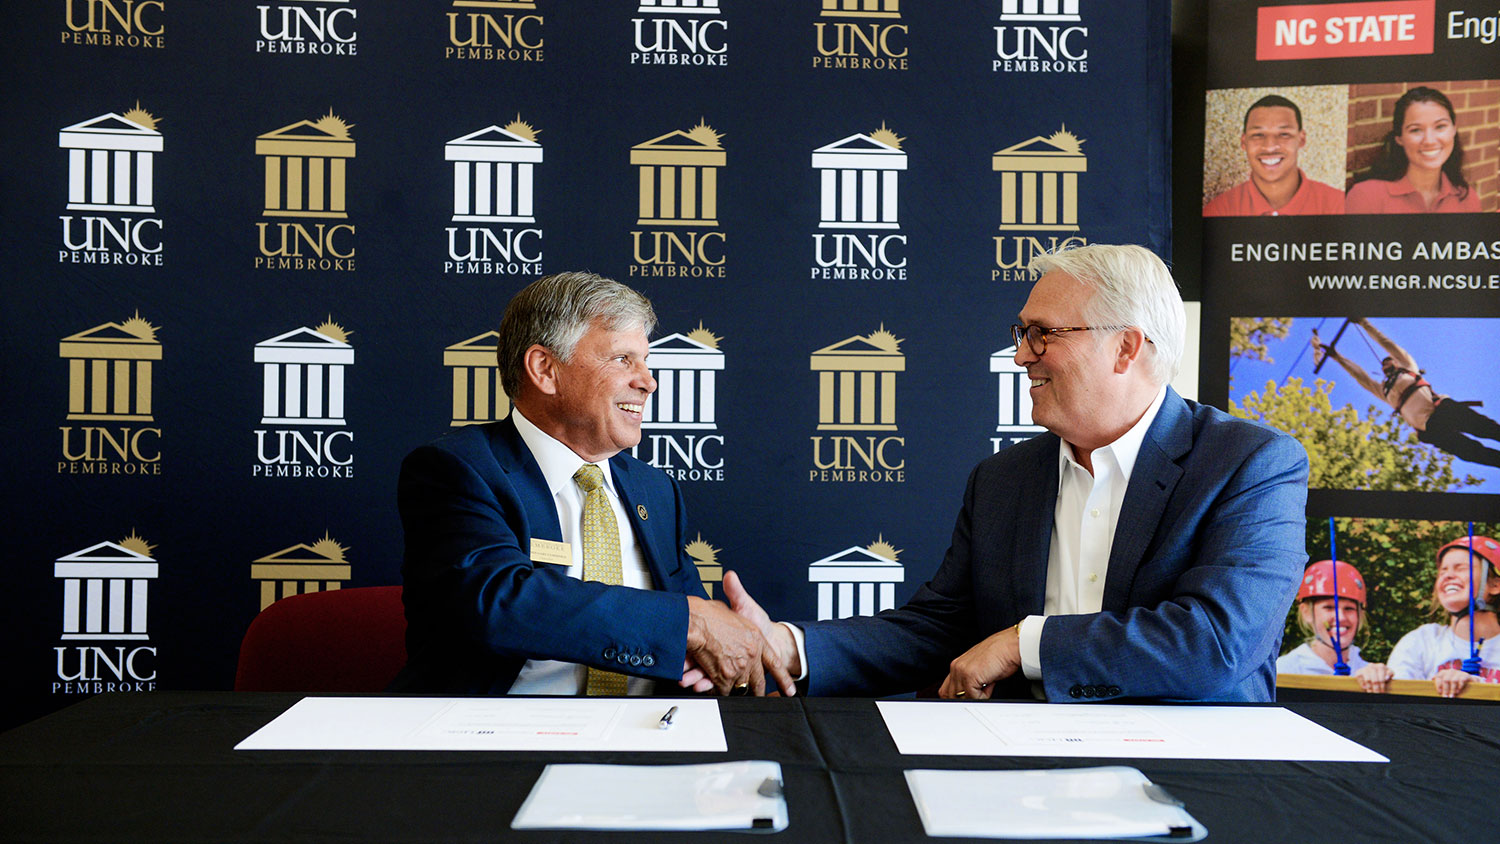 UNC Pembroke Chancellor Dr. Robin Gary Cummings, left, and NC State Chancellor Dr. Randy Woodson, right, shake hands after signing an agreement that creates a physics/engineering dual degree program between the two schools.